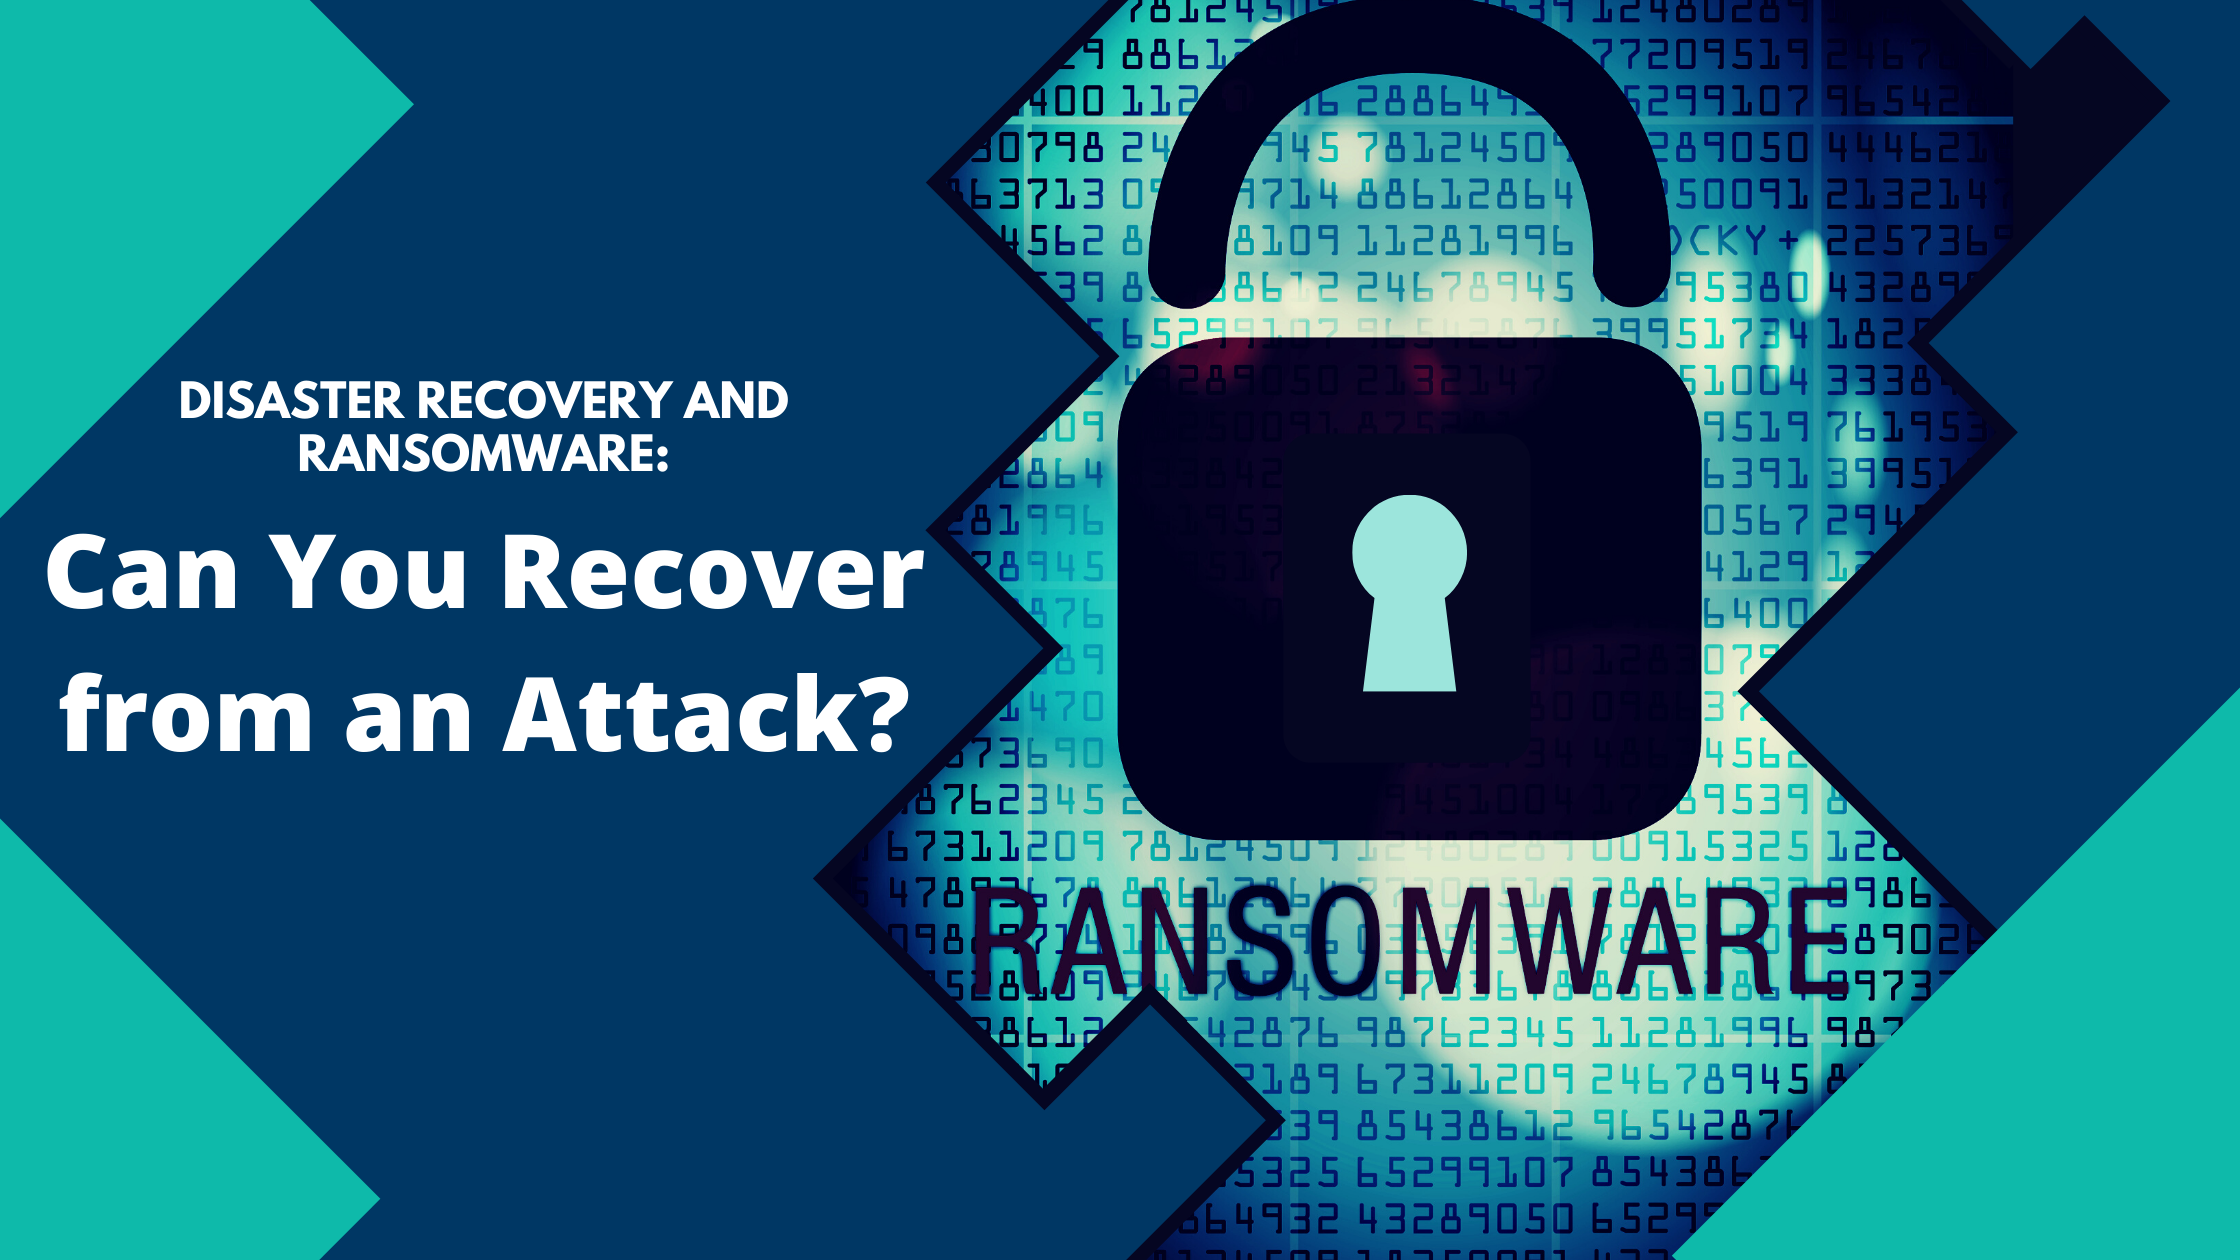 Disaster Recovery and Ransomware